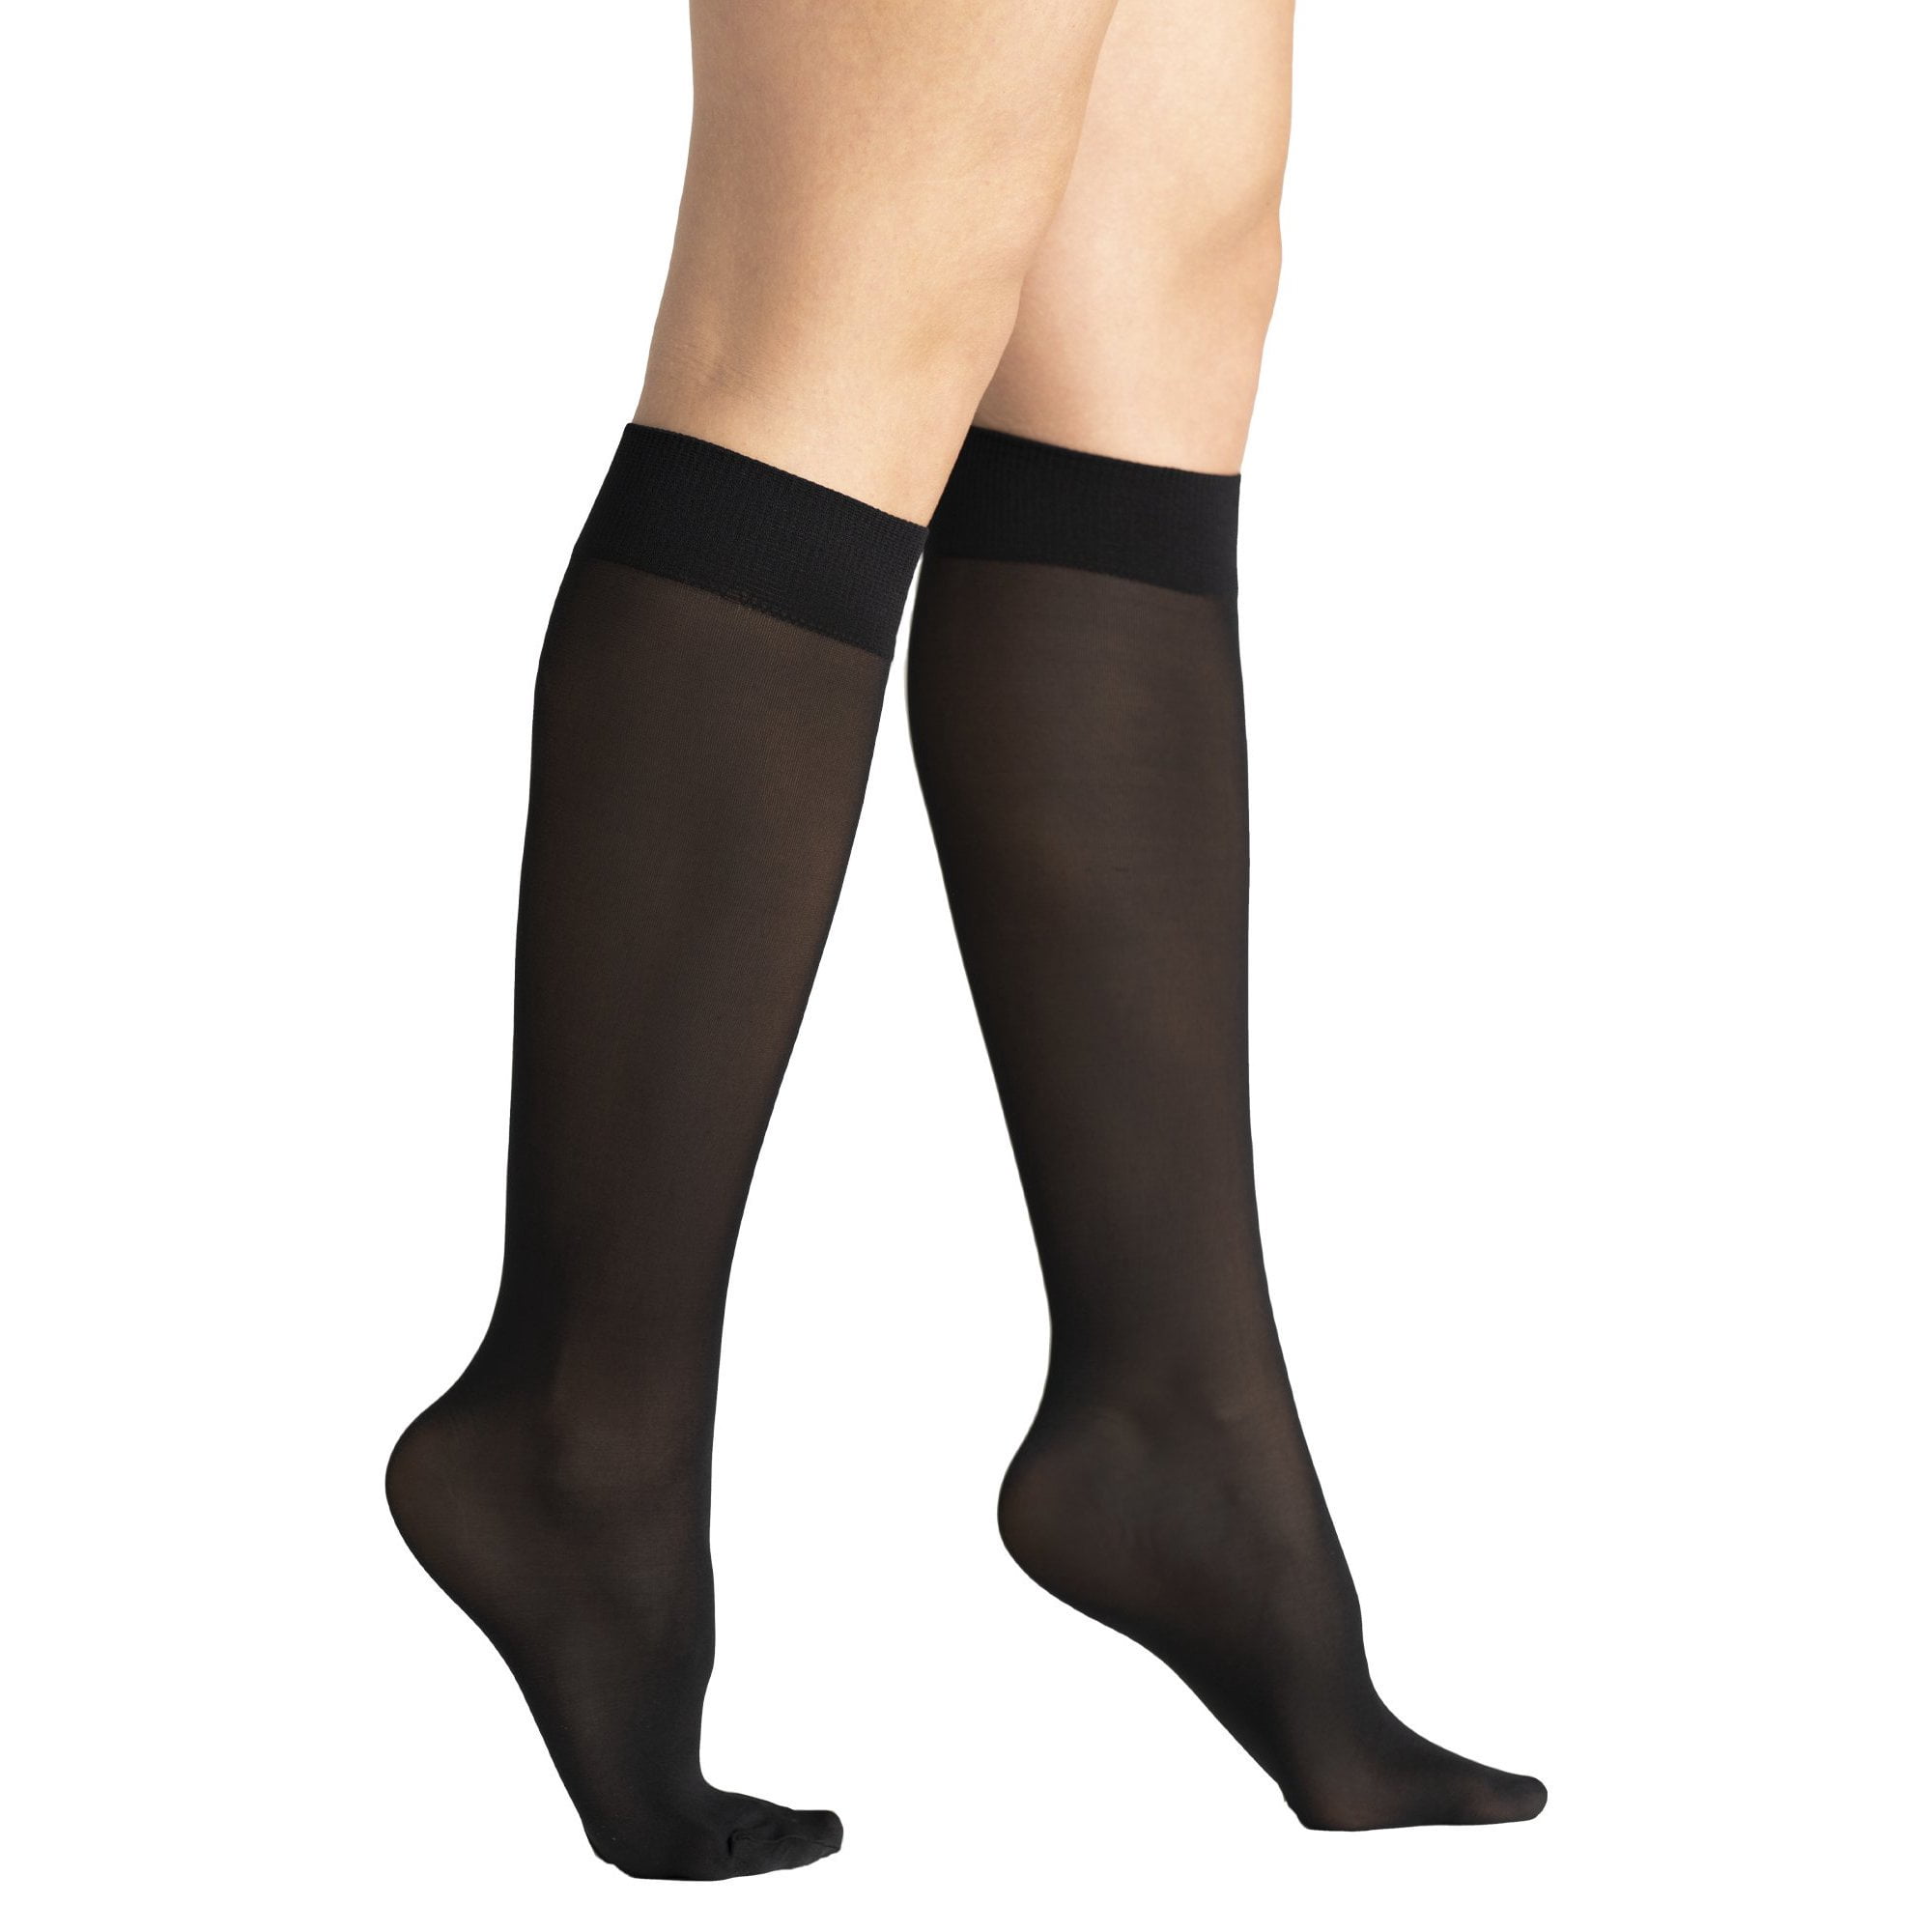 6 Pack of Women Knee High Socks Dress Trouser Socks with Comfort Band Opaque Stretchy Spandex